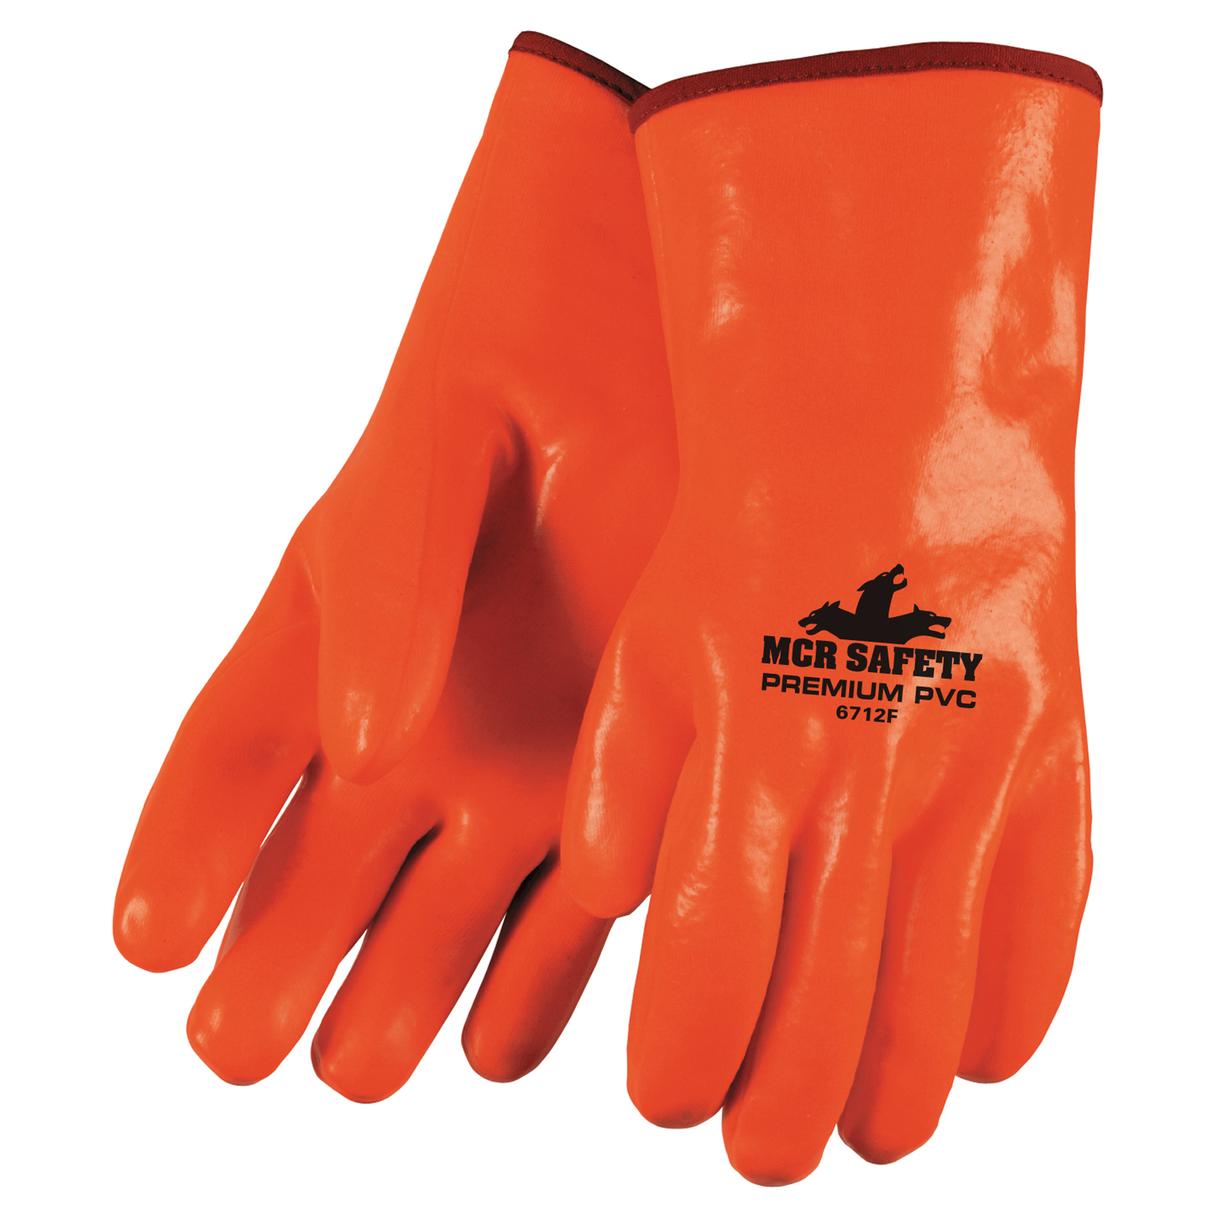 PIP ArmorTuff Smooth Nitrile Coated Jersey Gloves - Knit Wrist